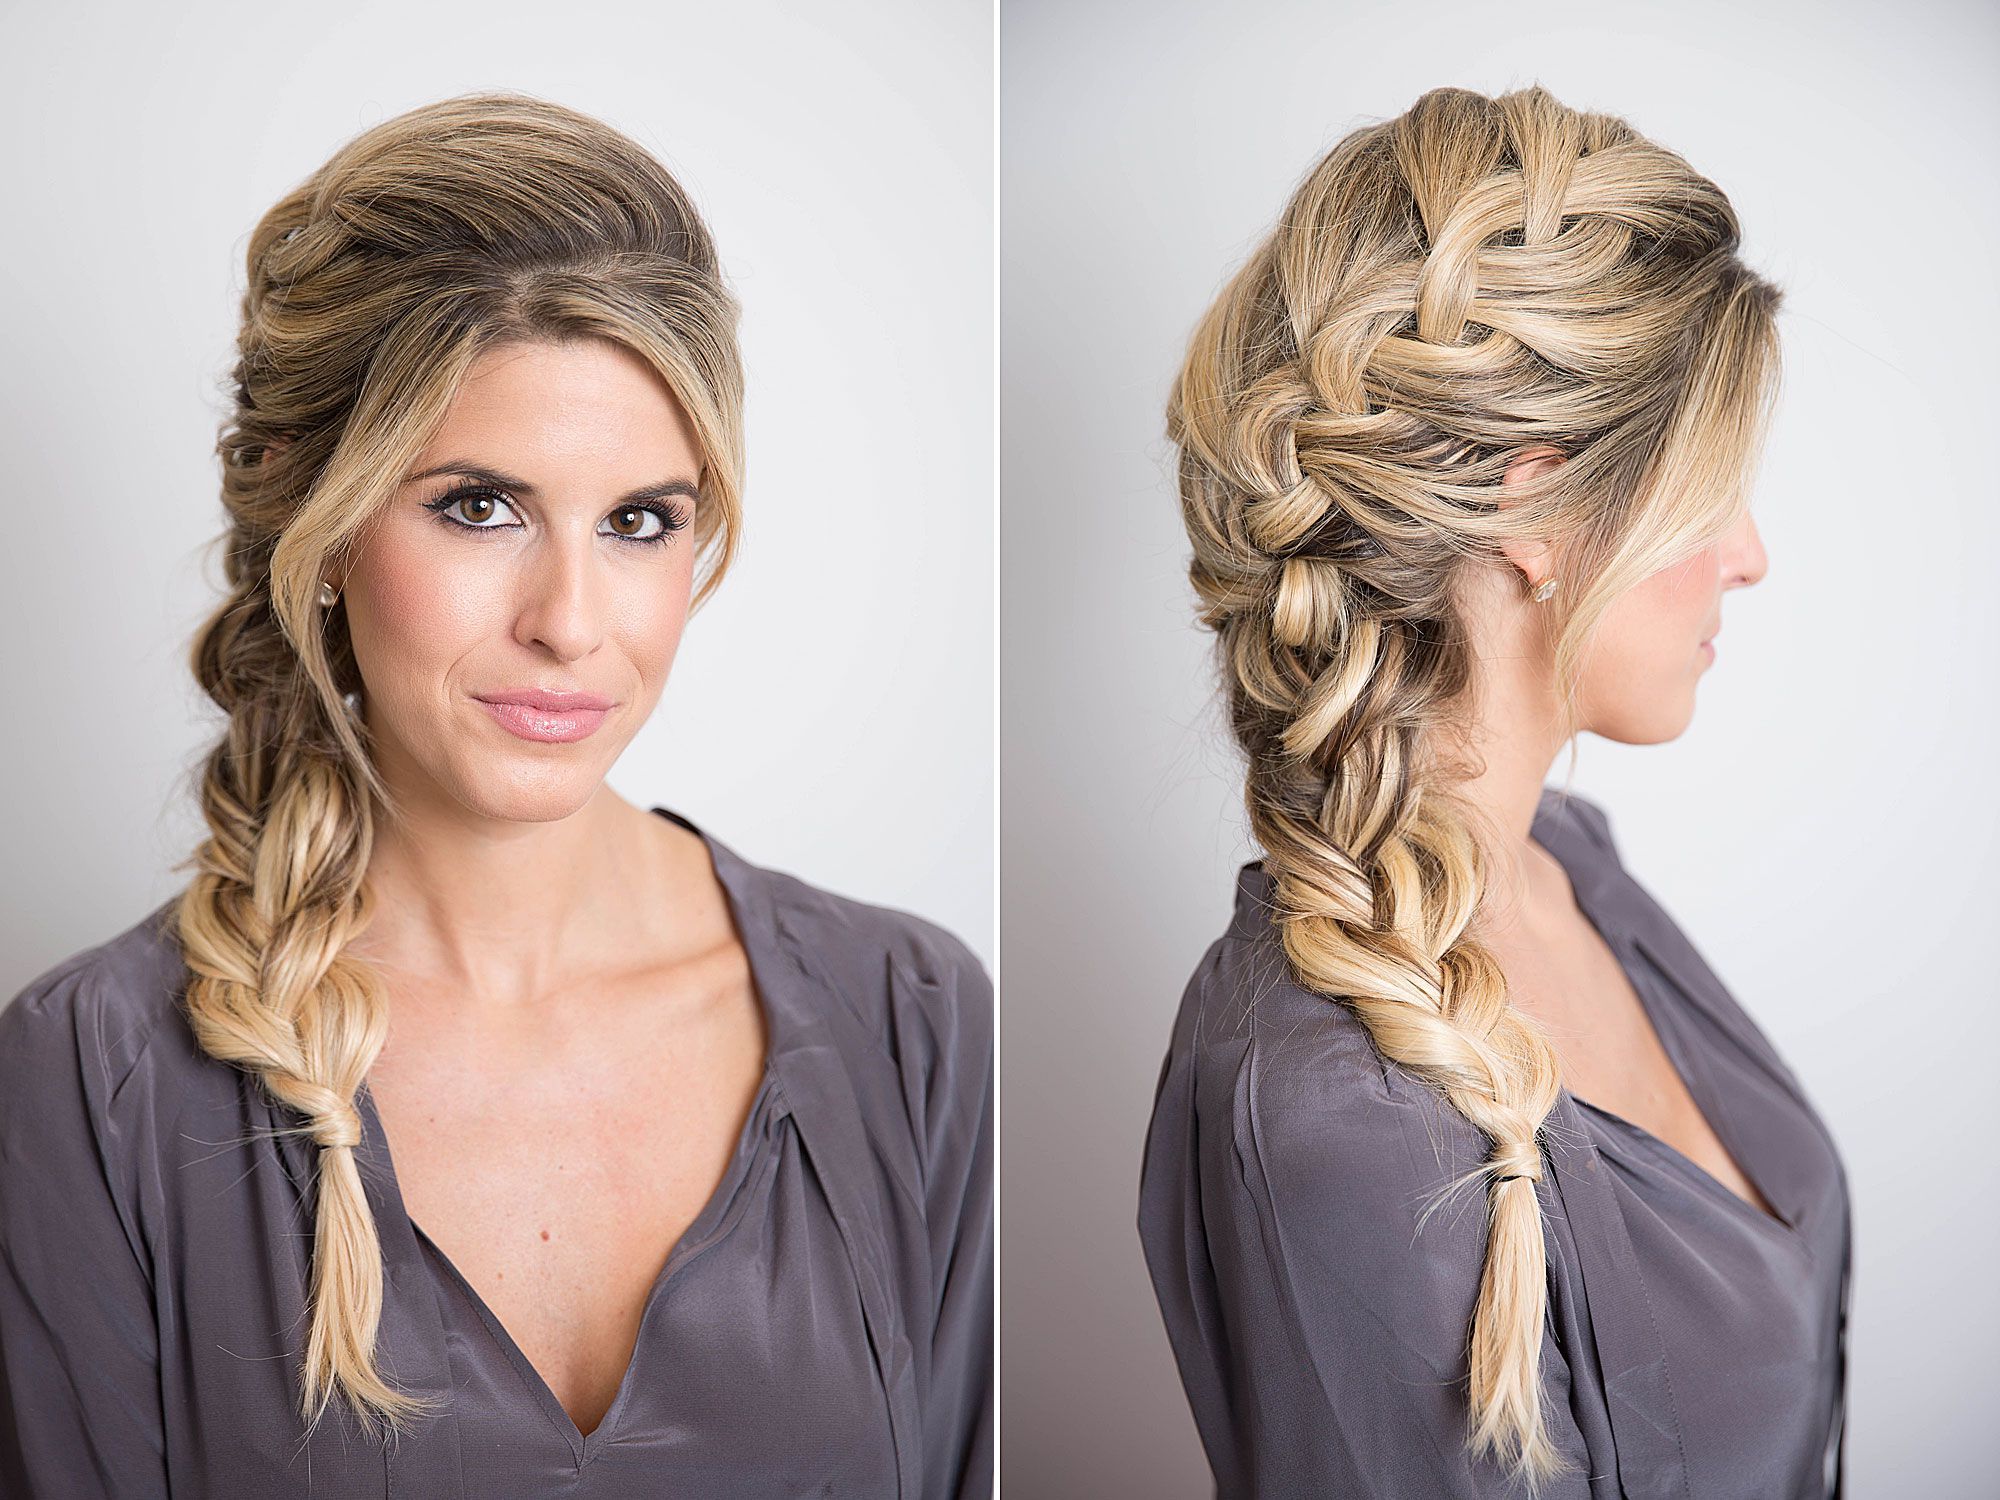 17 Braided Hairstyles With Gifs – How To Do Every Type Of Braid Inside Famous Side Rope Braid Hairstyles For Long Hair (View 5 of 20)